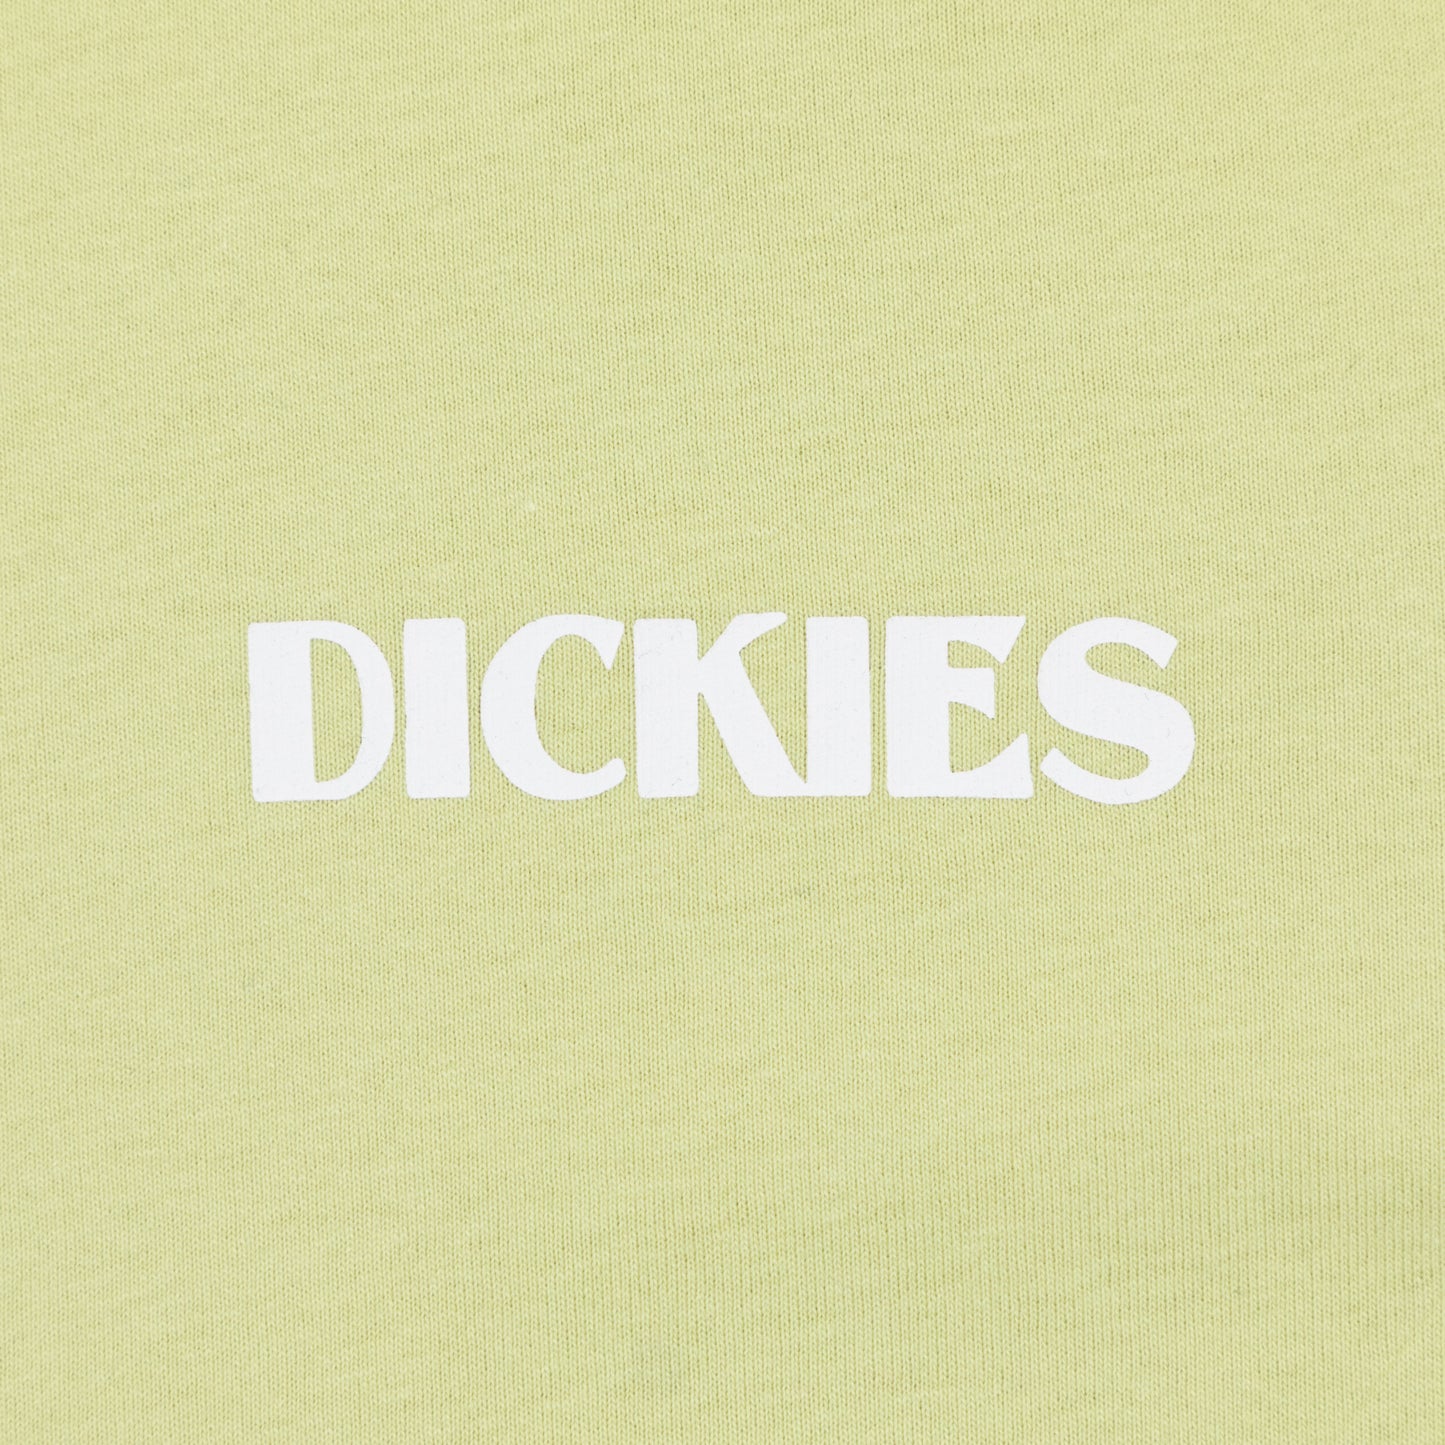 DICKIES Timberville Long Sleeve T-shirt in PALE GREEN